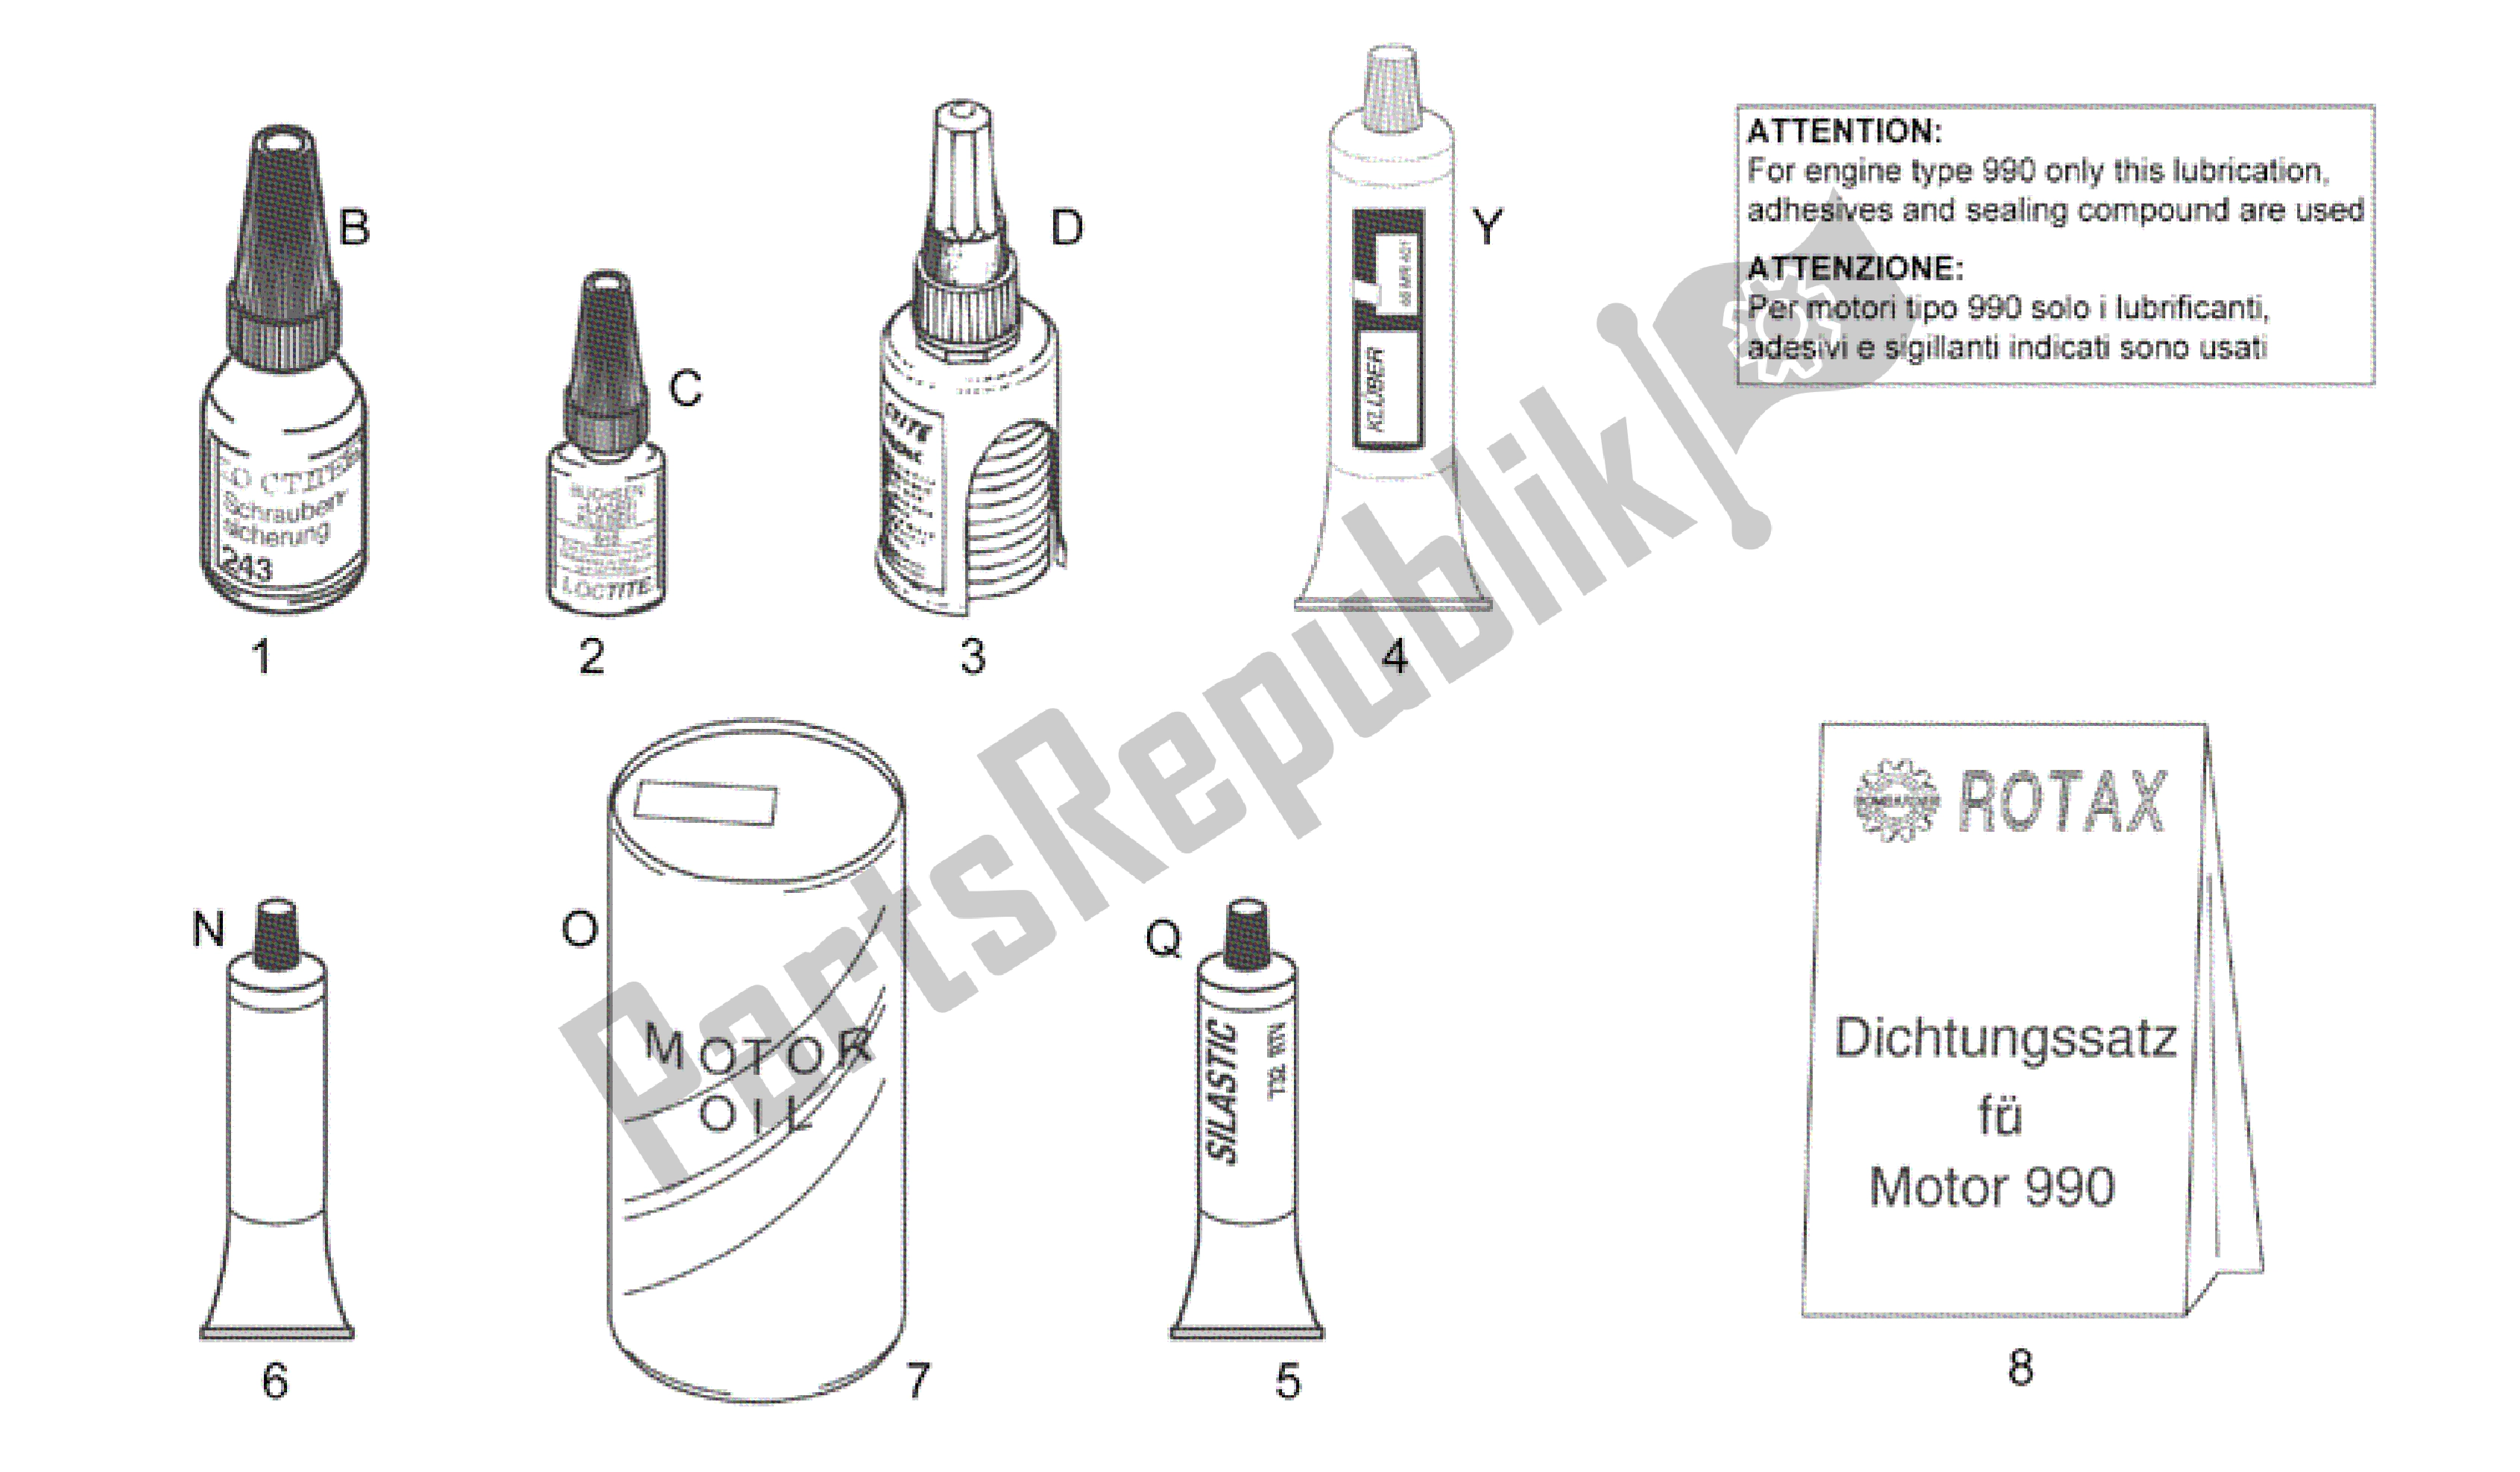 All parts for the Sealing And Lubricating Agents of the Aprilia RSV Mille 3963 1000 2003